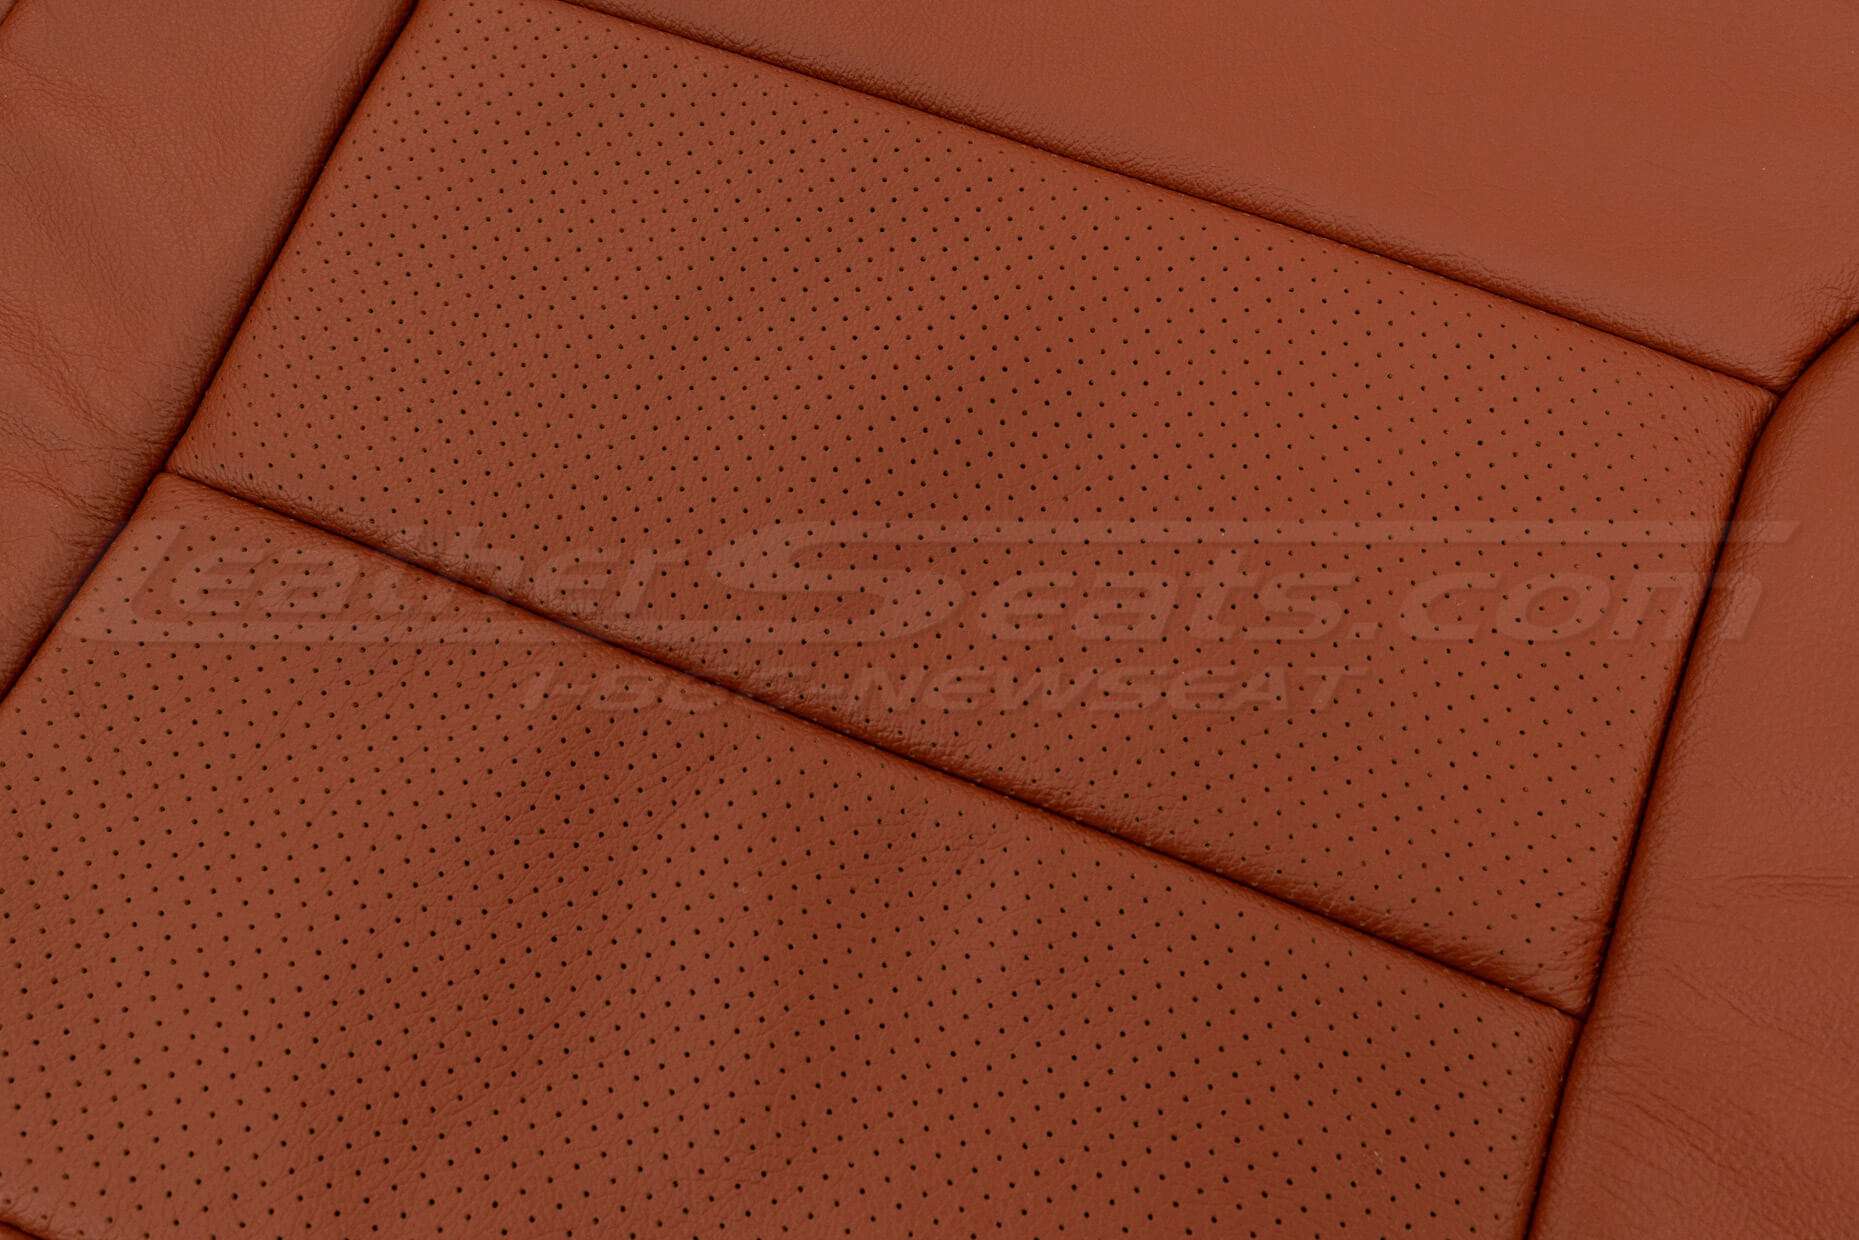 Perforated Insert close-up